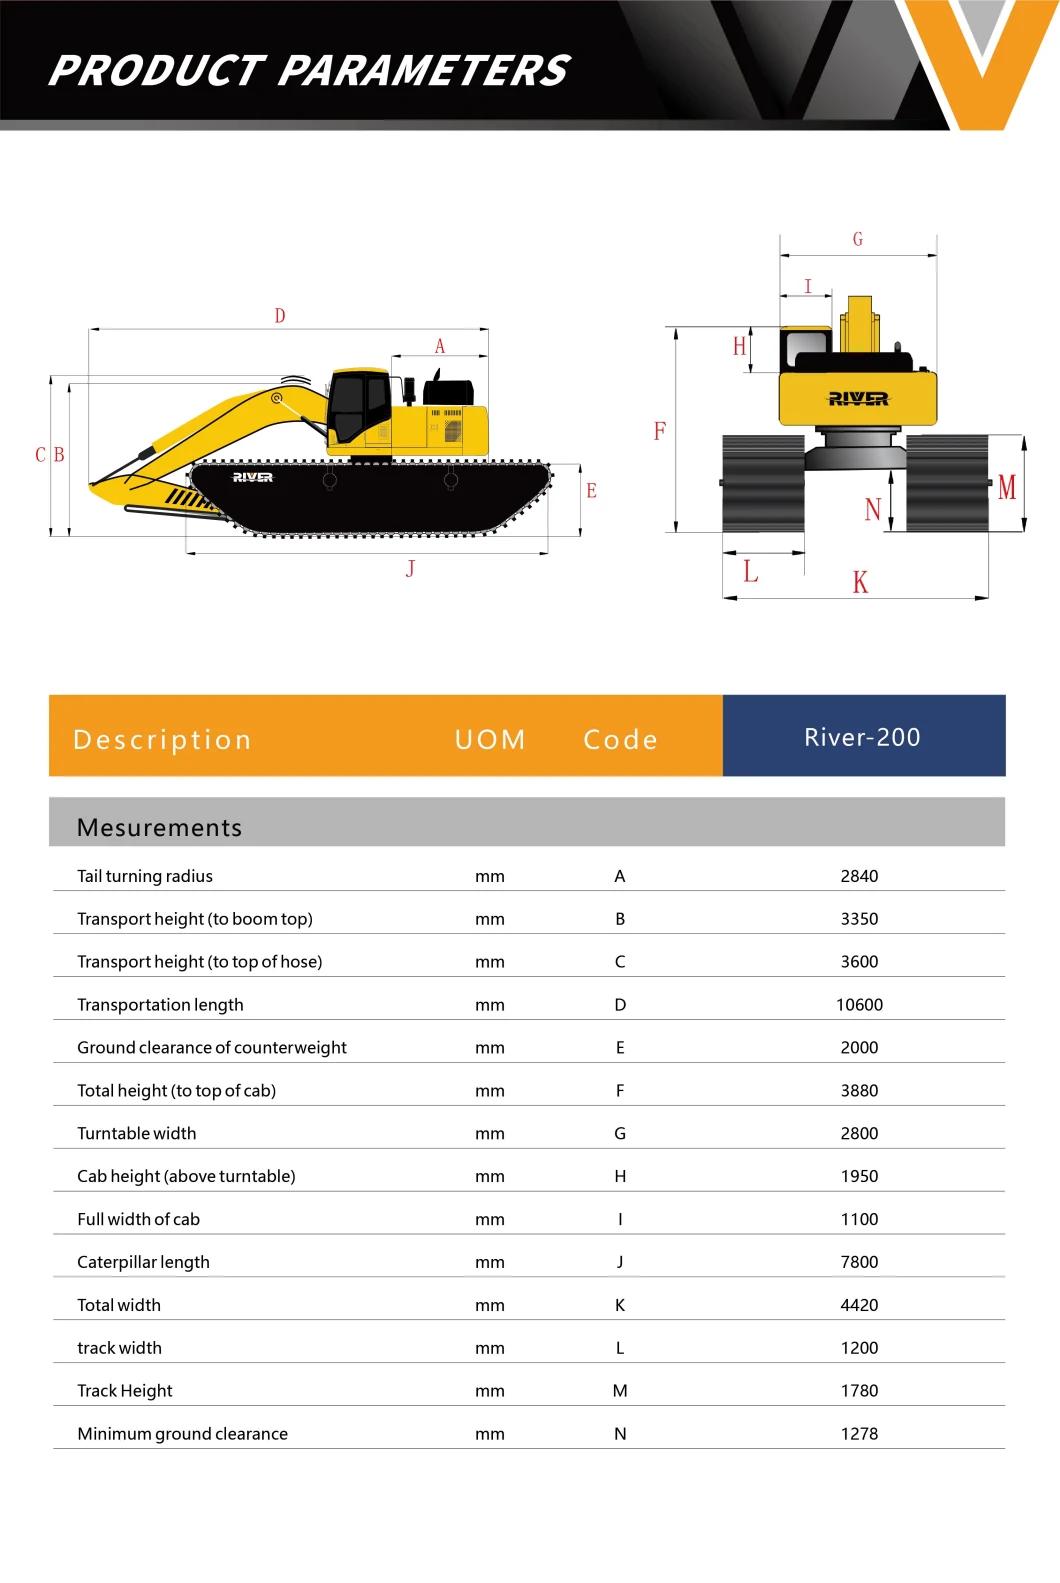 Used Cat 320c Amphibious Excavator with New Pontoon Undercarriage 15m Long Reach Arm Big Discount China Manufacture